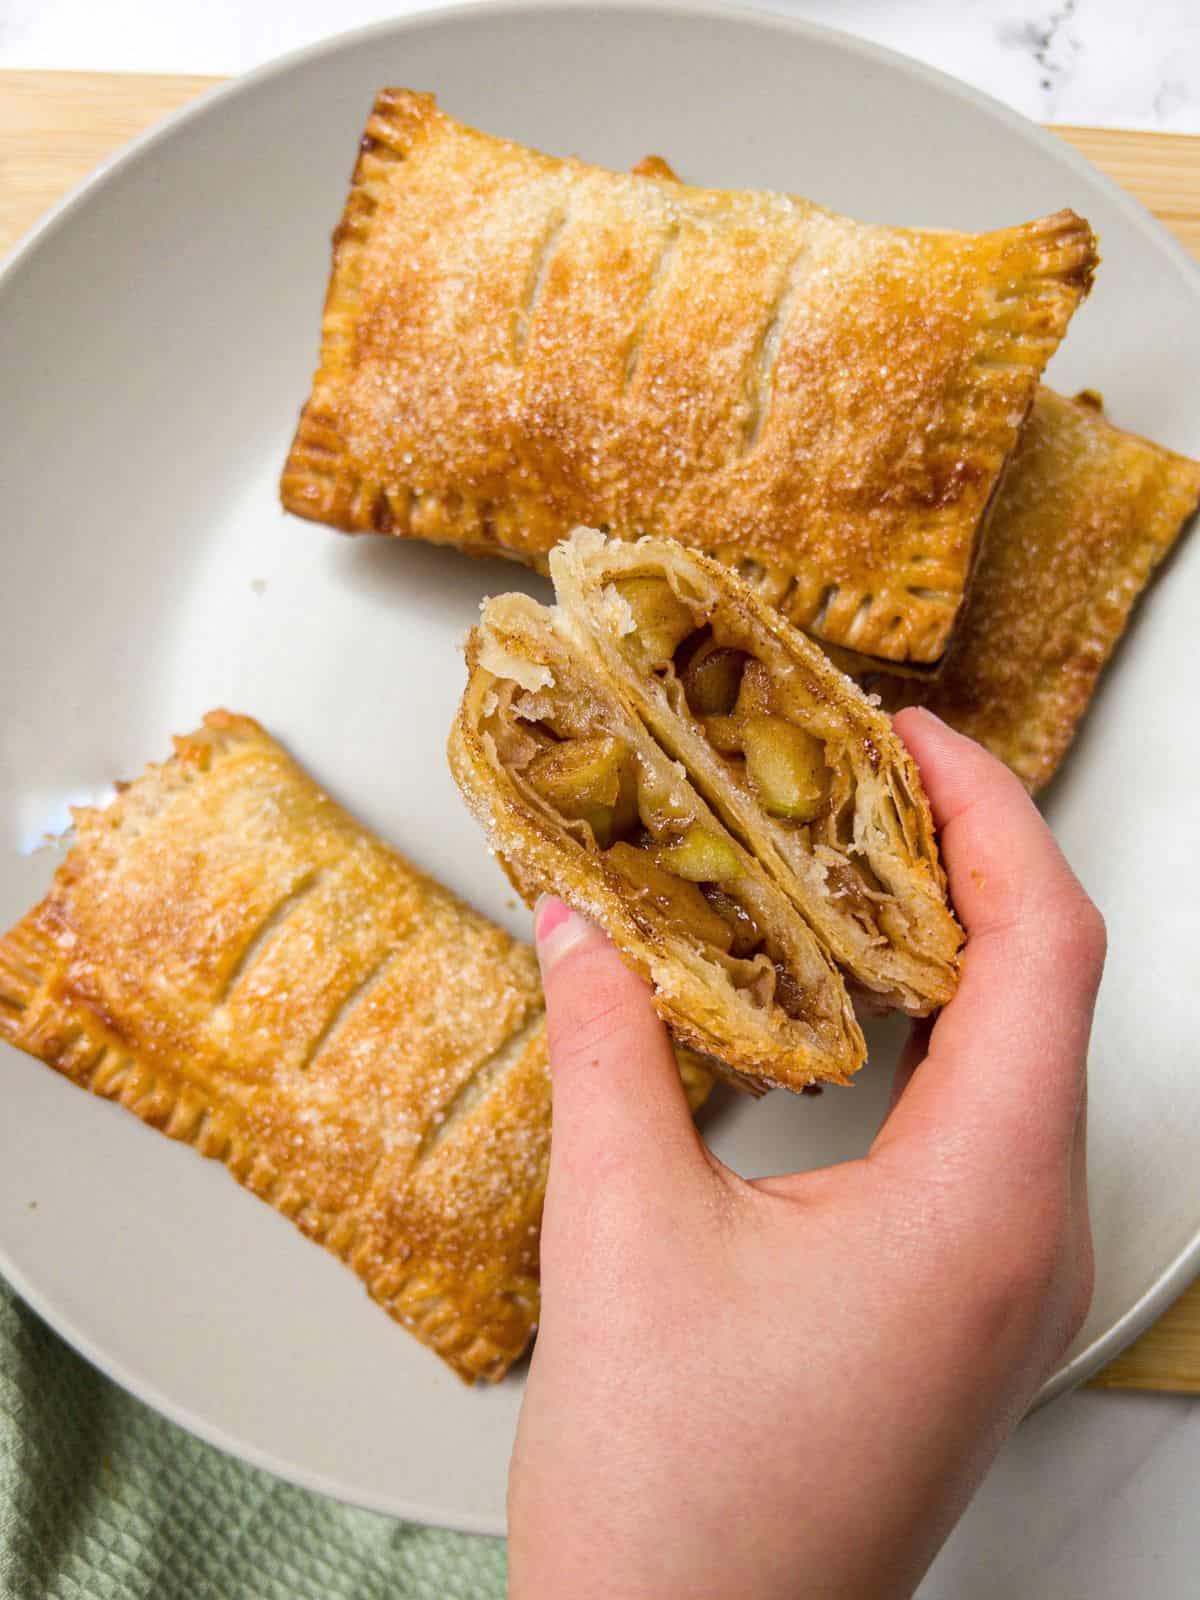 Three apple turnovers on a neutral plate and one cut in half being picked up.